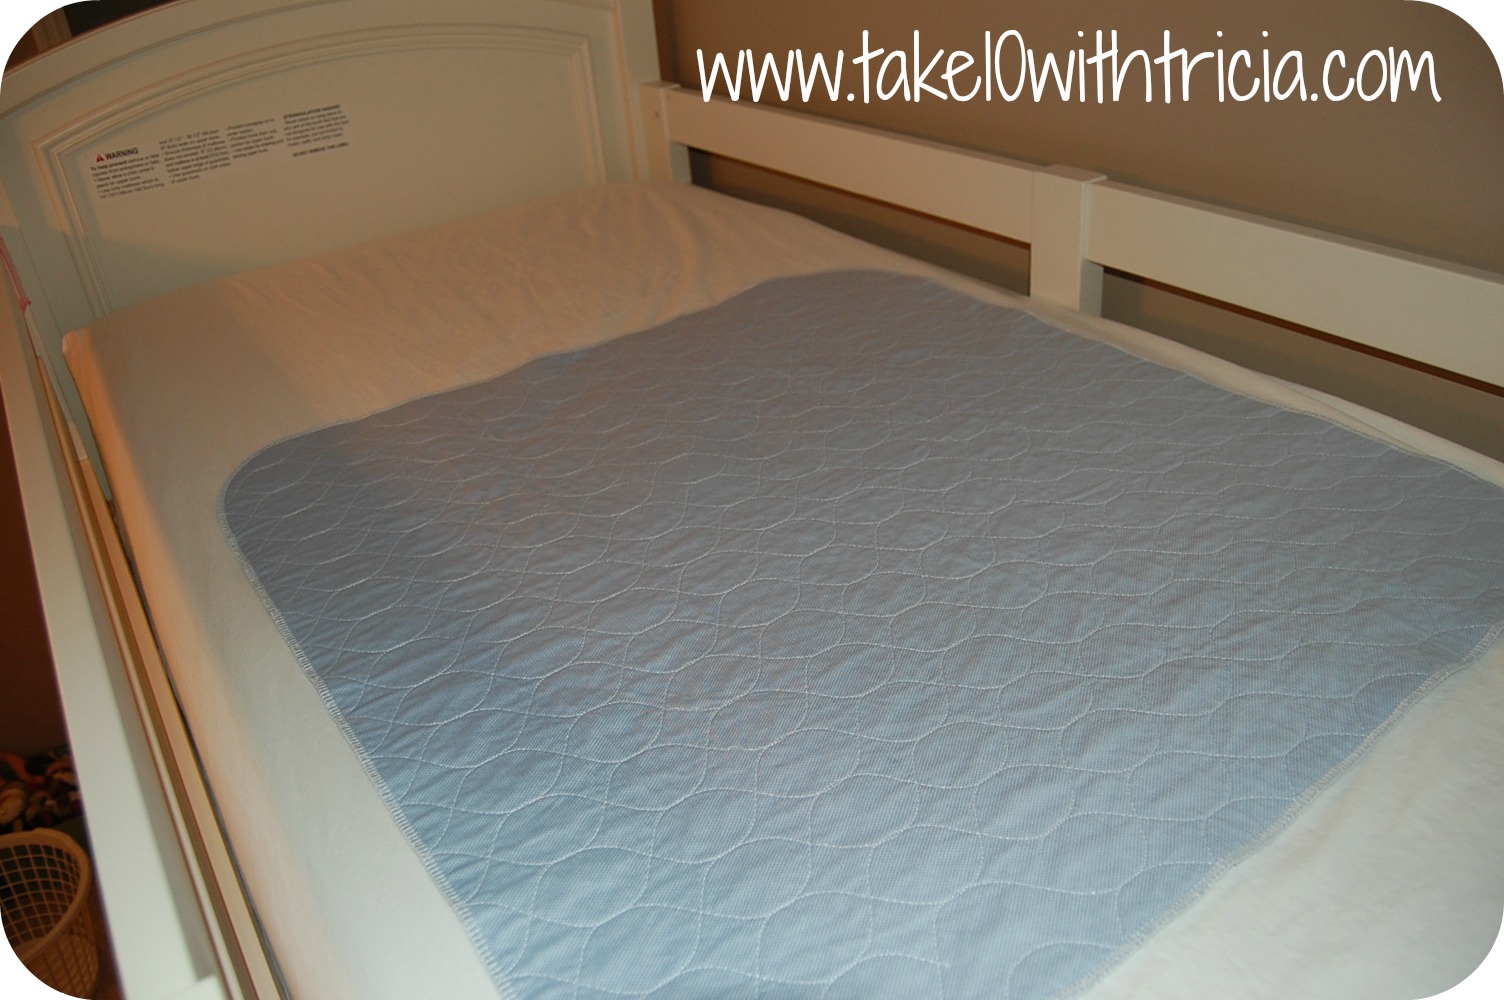 The Secret To Bunk Bed Sheets Take 10, Bunk Bed Sheet Size